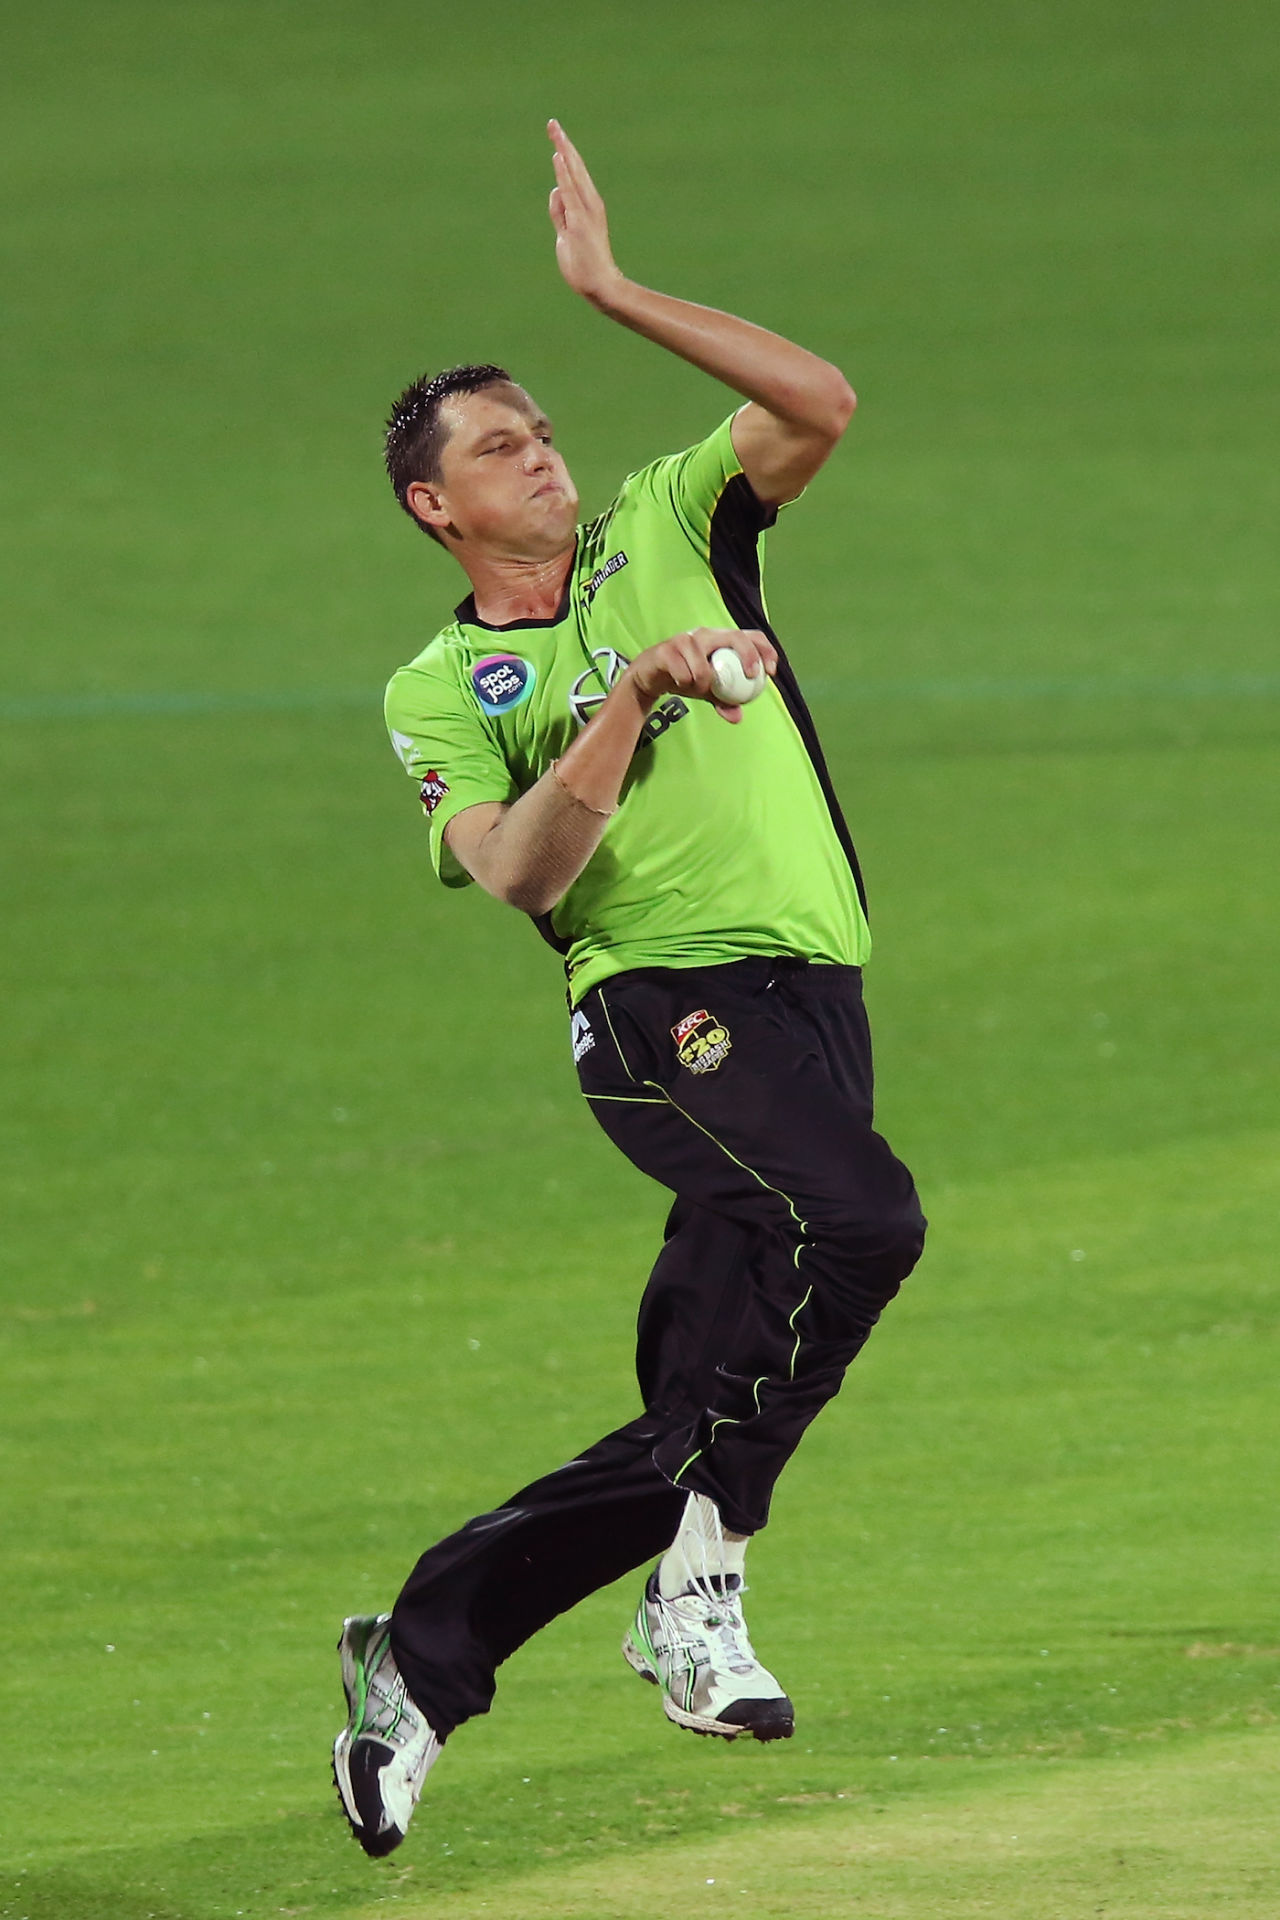 Chris Tremain in his delivery stride, BBL, Sydney Thunder, January 12, 2015